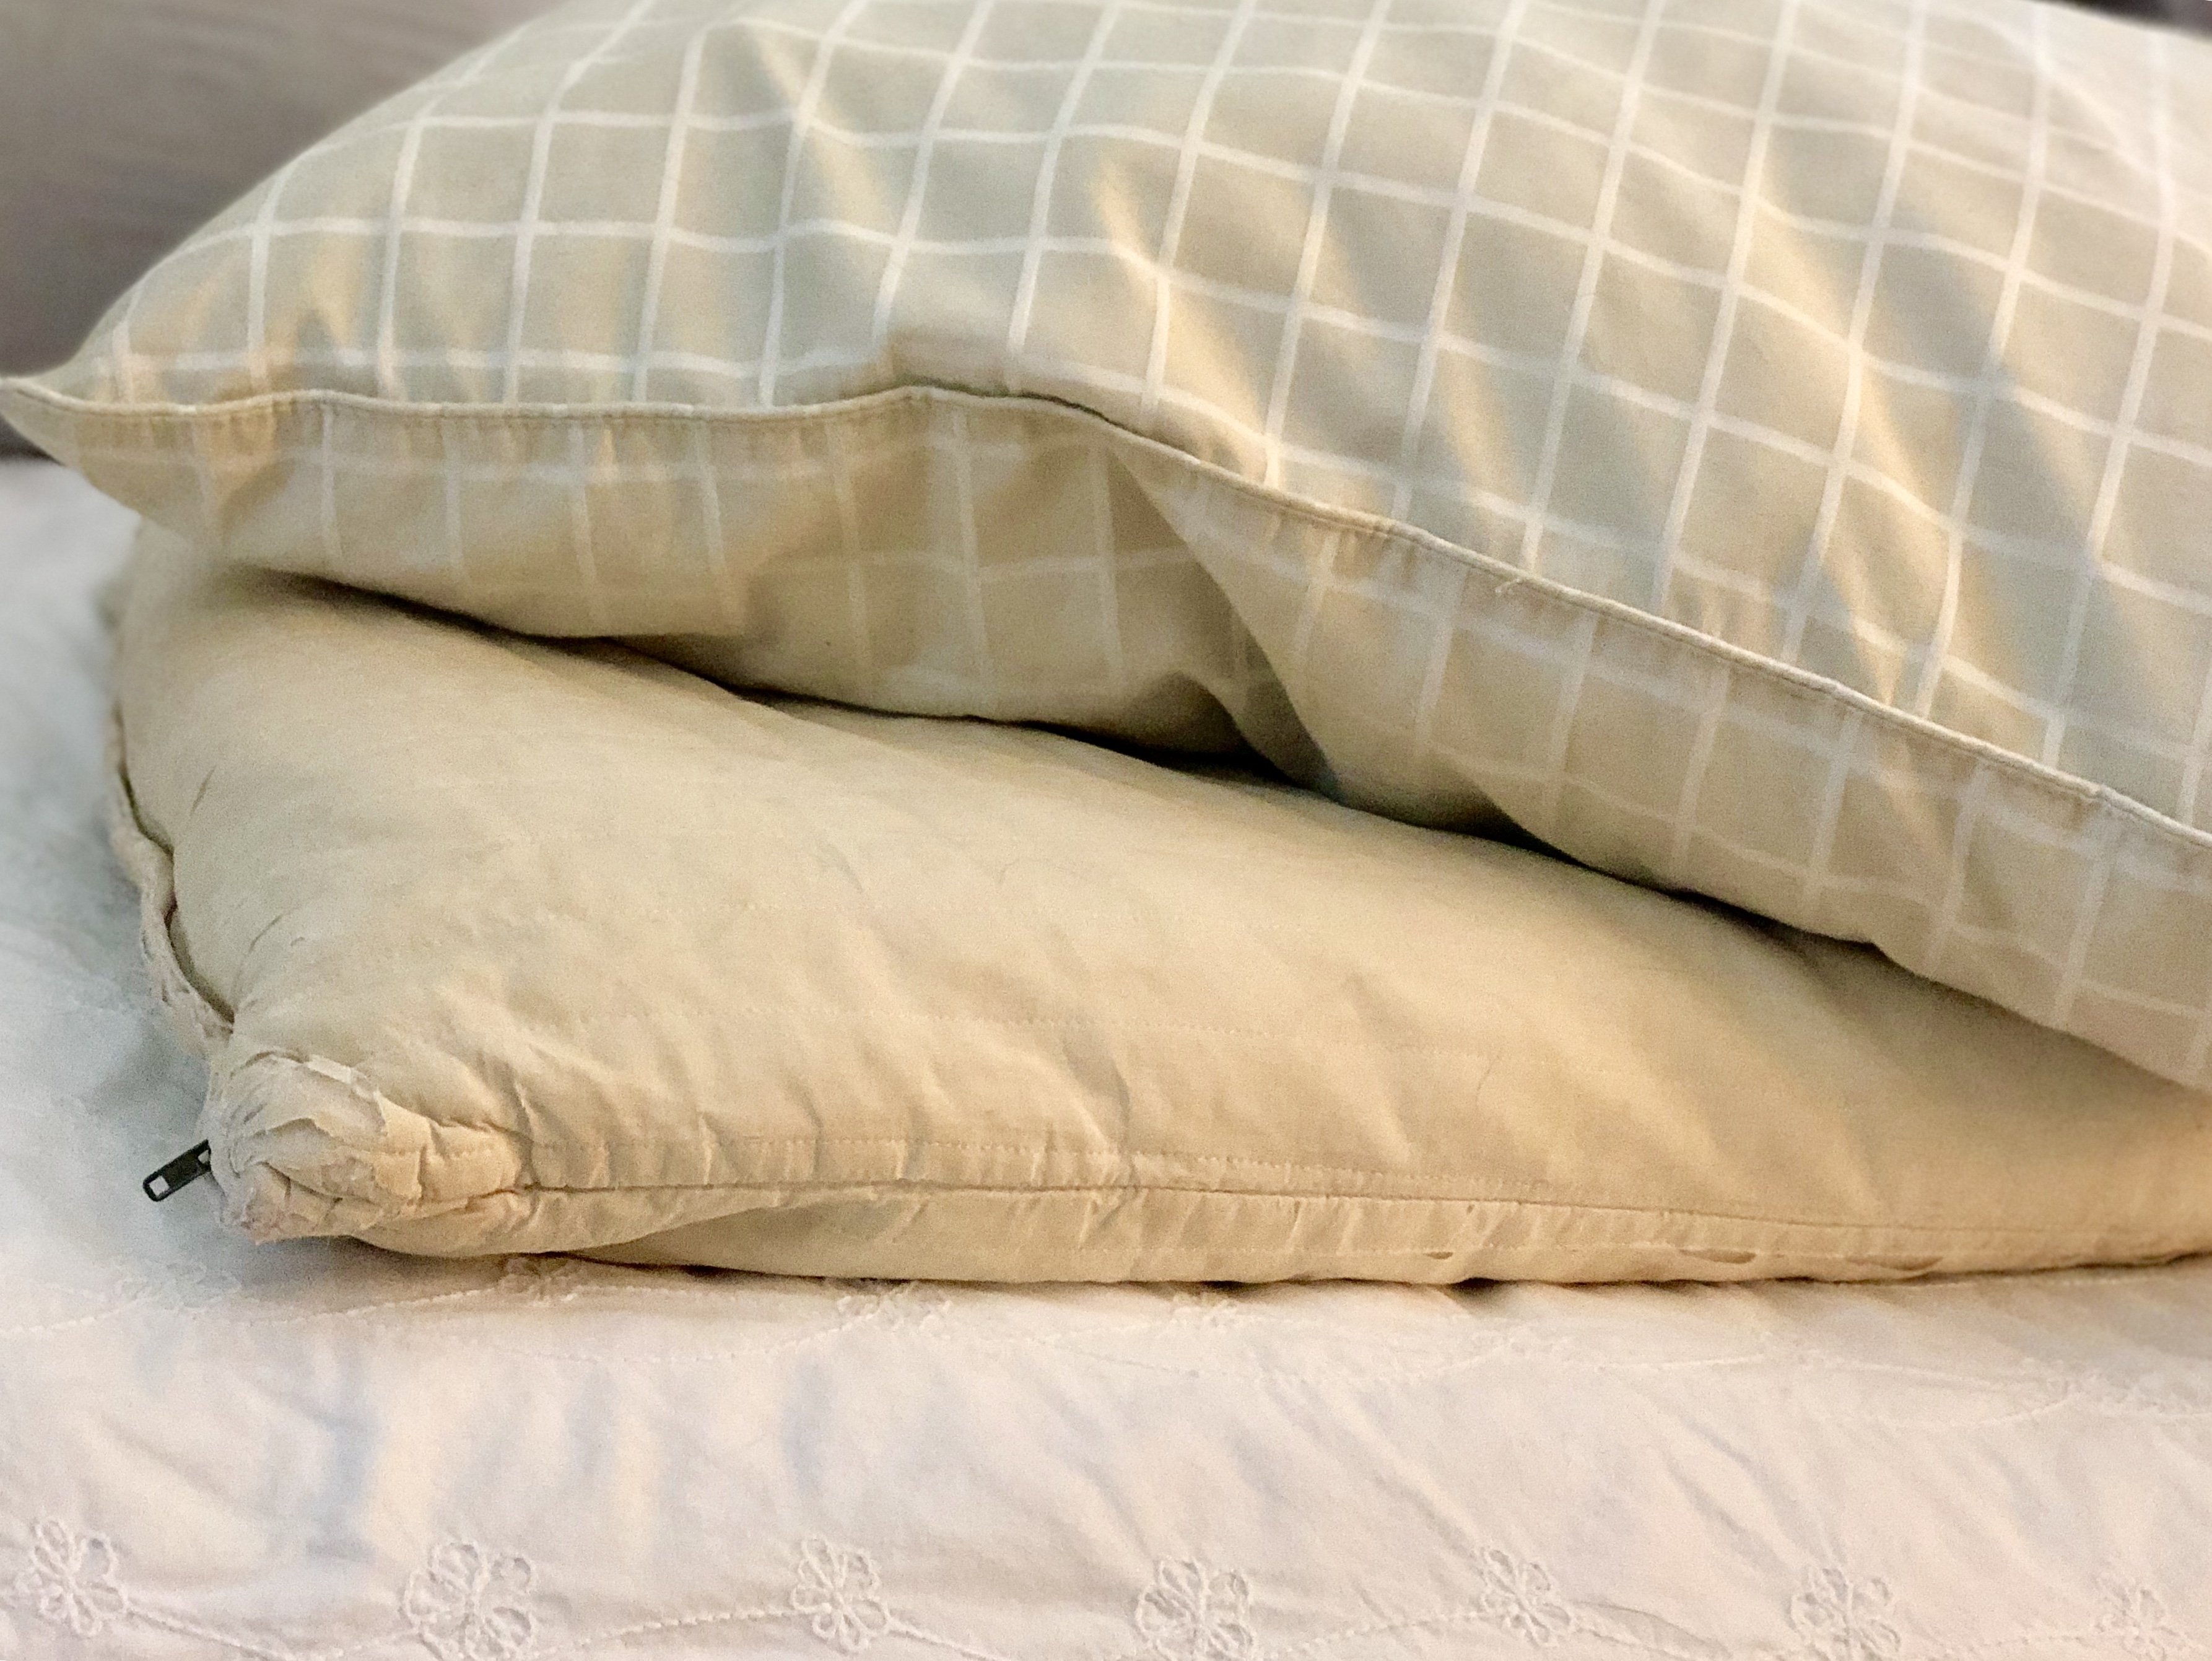 How to Clean Yellowed Pillows